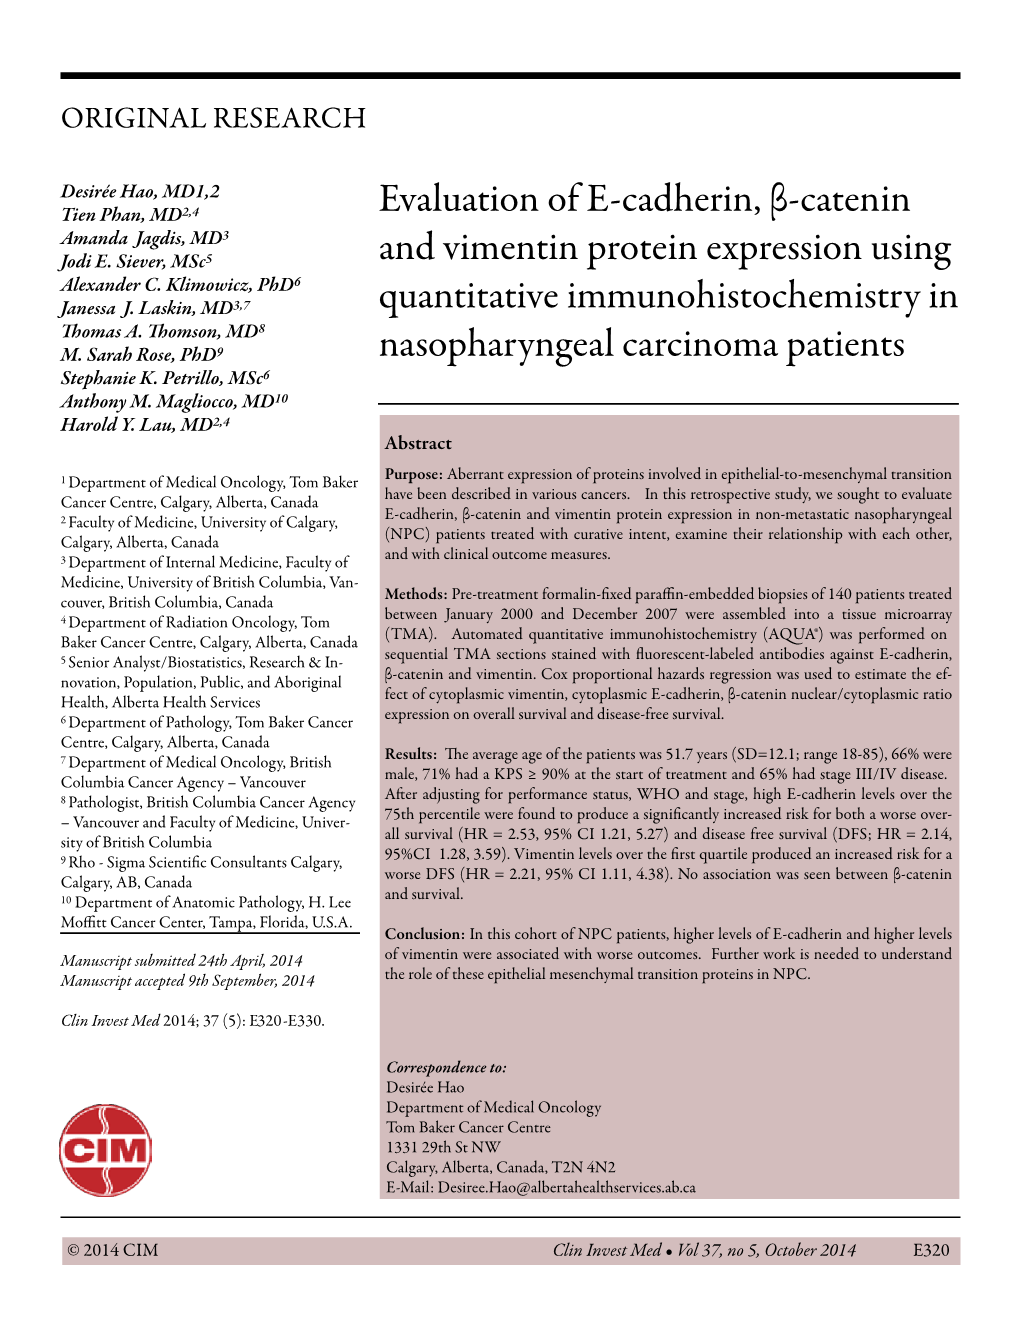 Evaluation of E-Cadherin, Β-Catenin and Vimentin Protein Expression